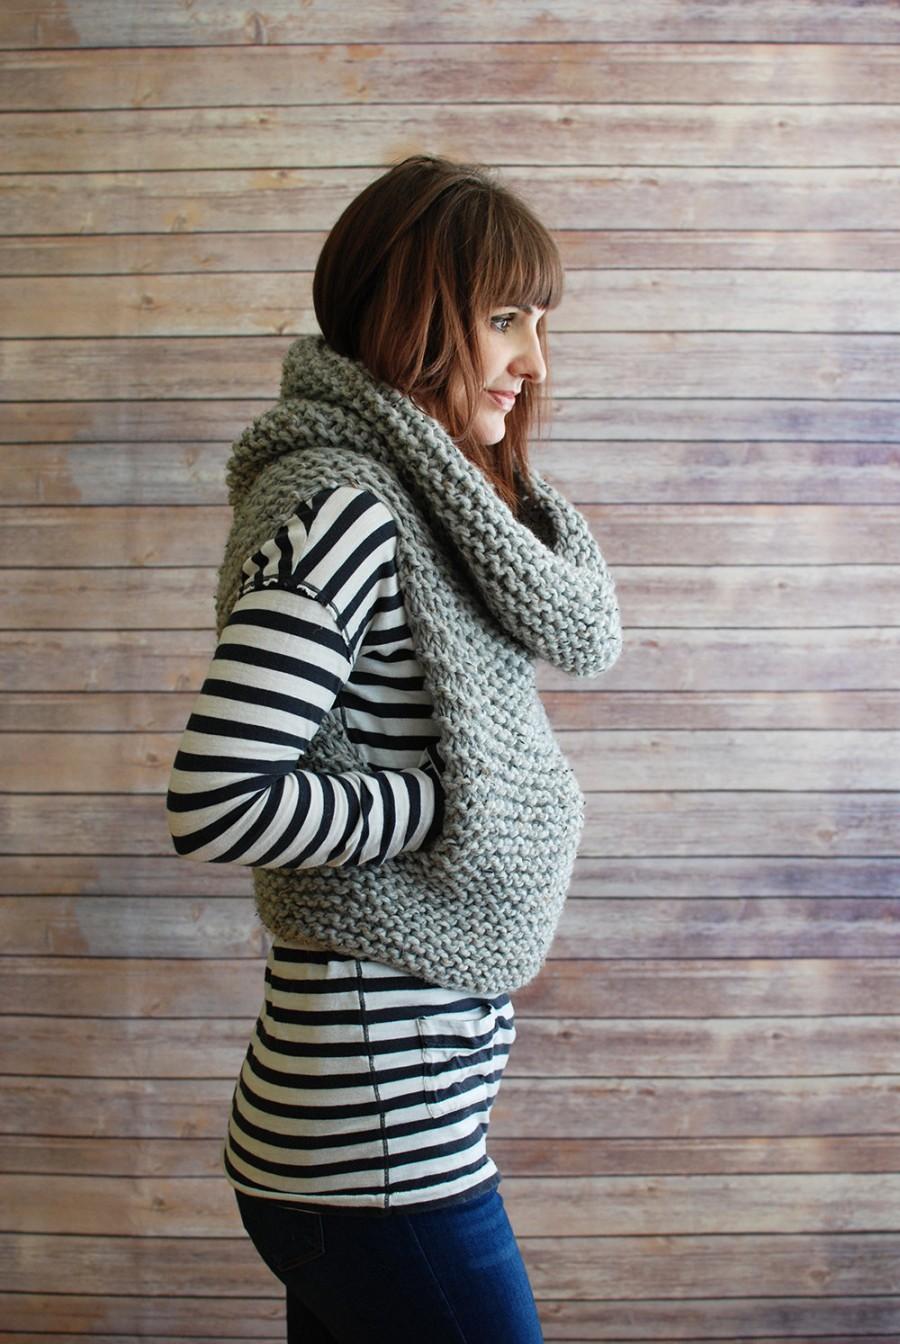 Wedding - The Mavis + Chunky Knit Hooded Cowl Vest + Made to Order